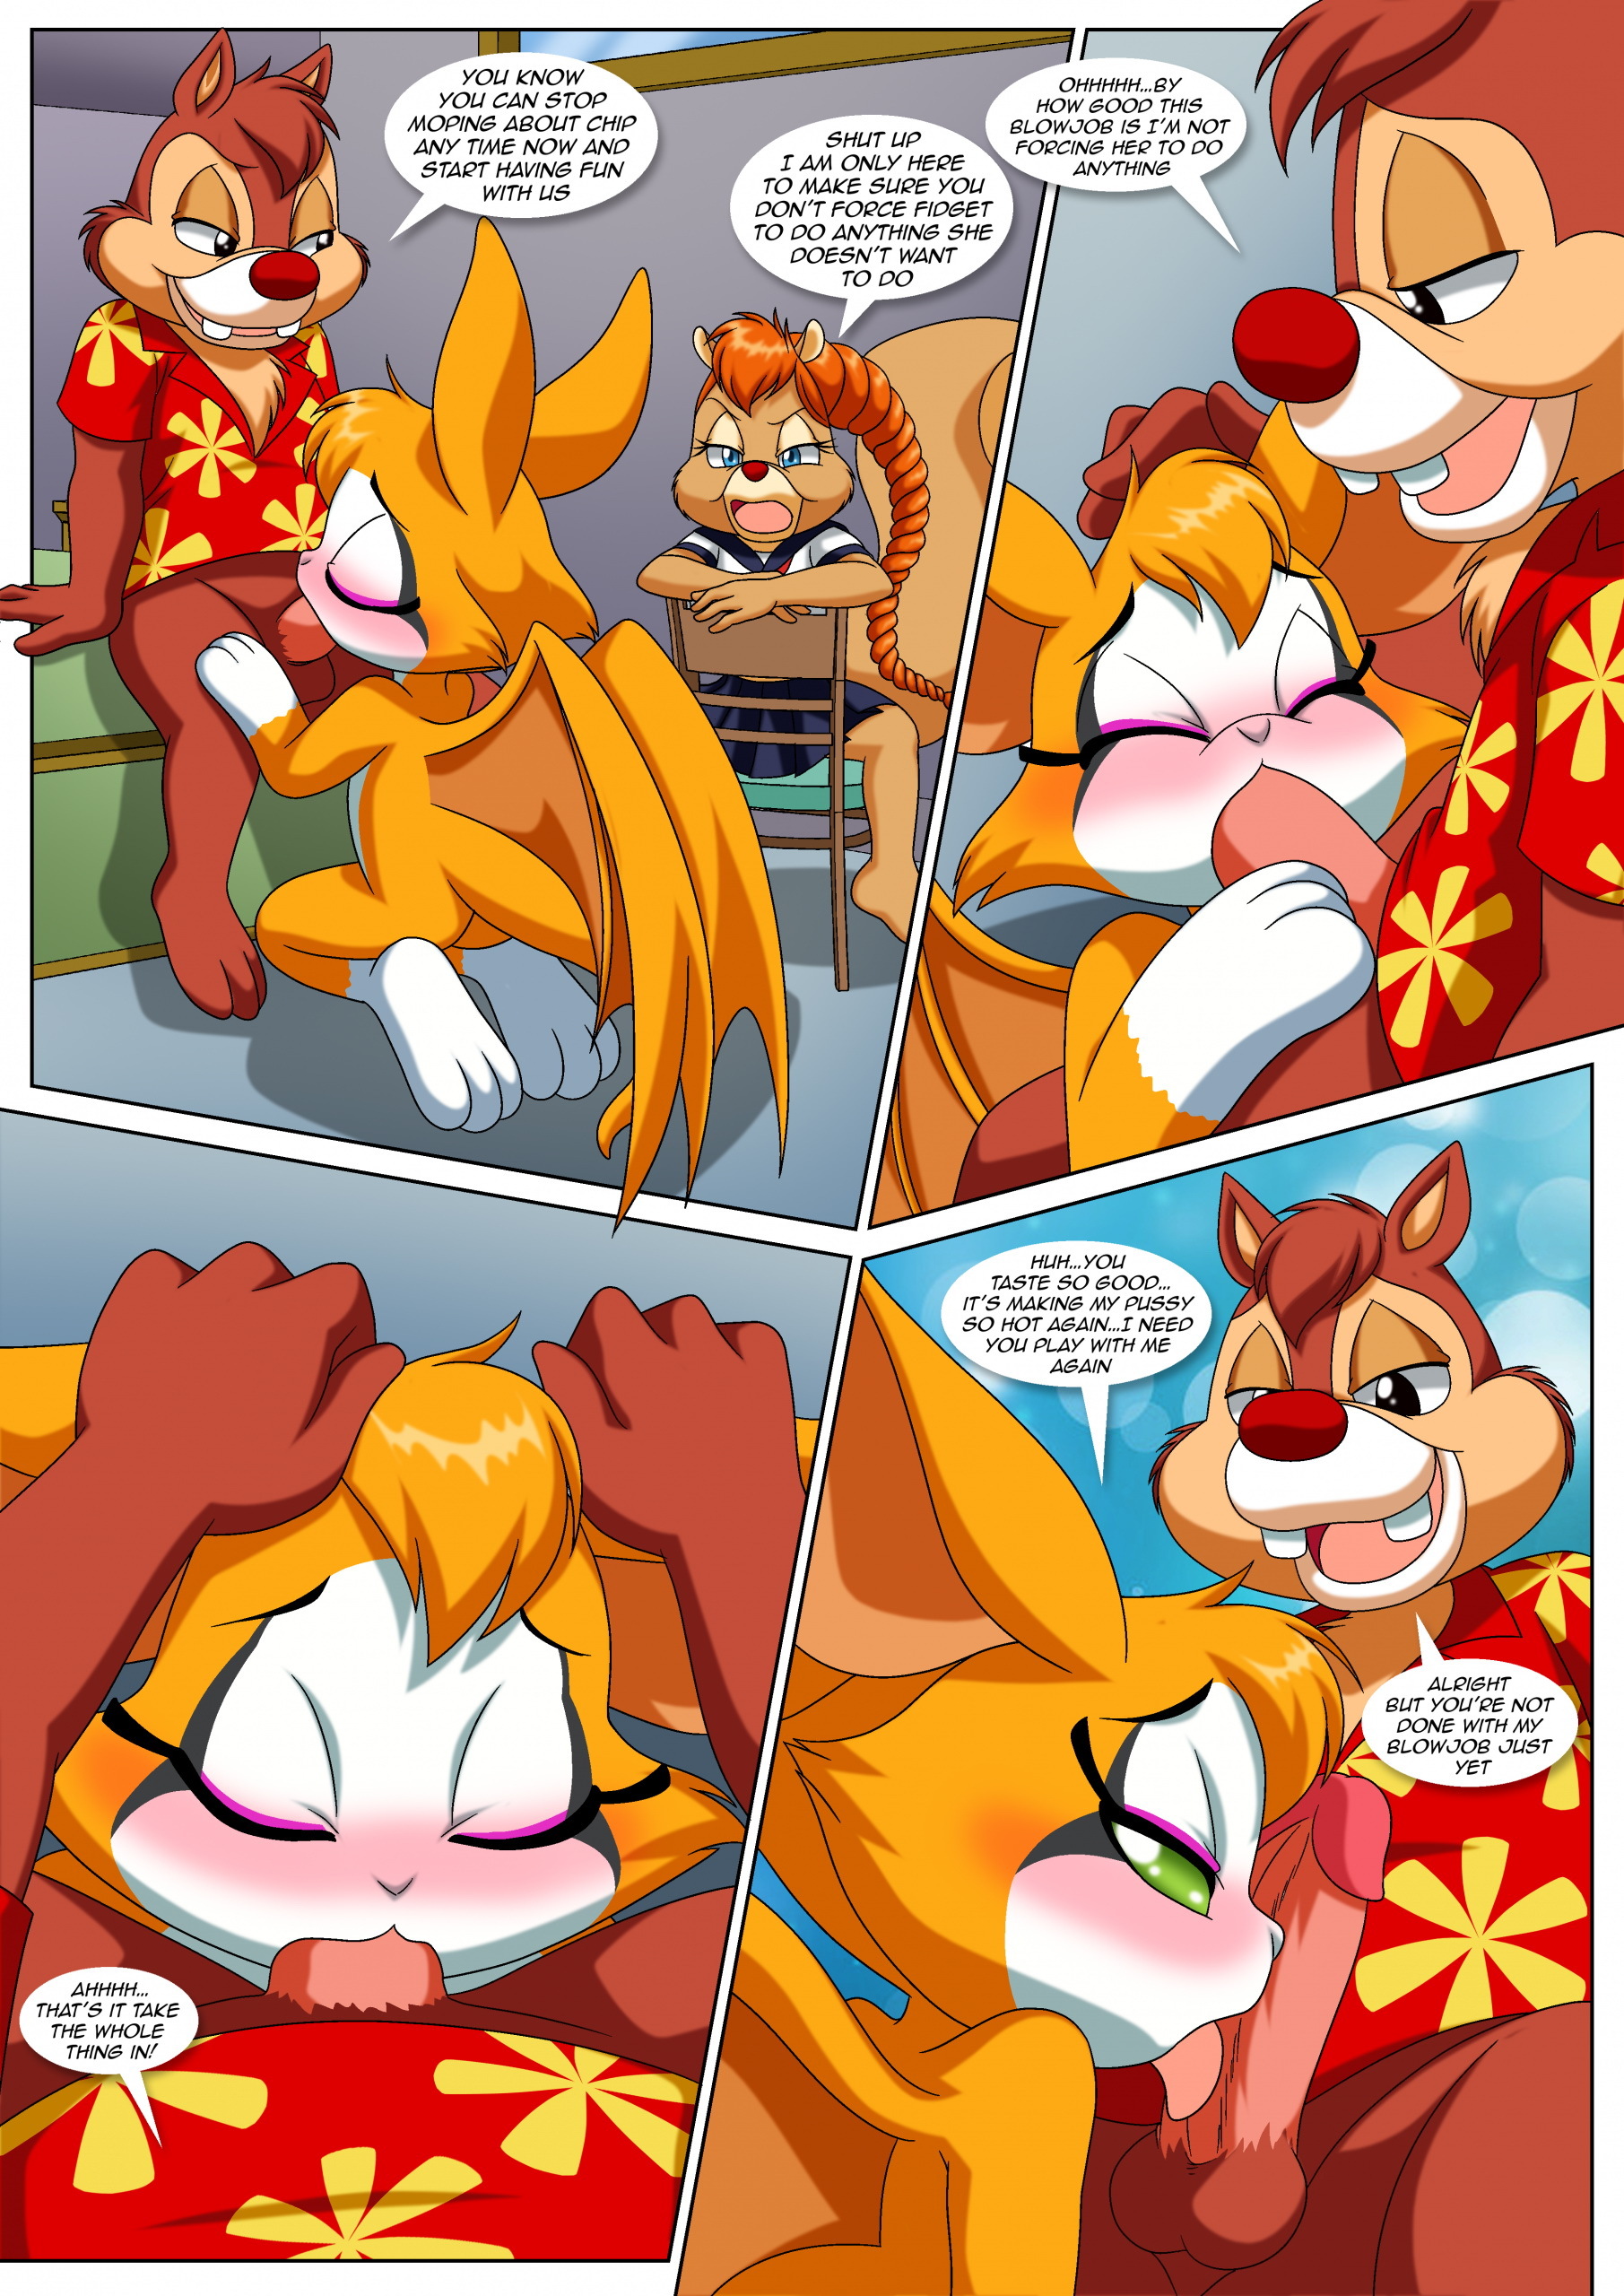 Rescue Rodents 6 - A Time for Love - Page 8